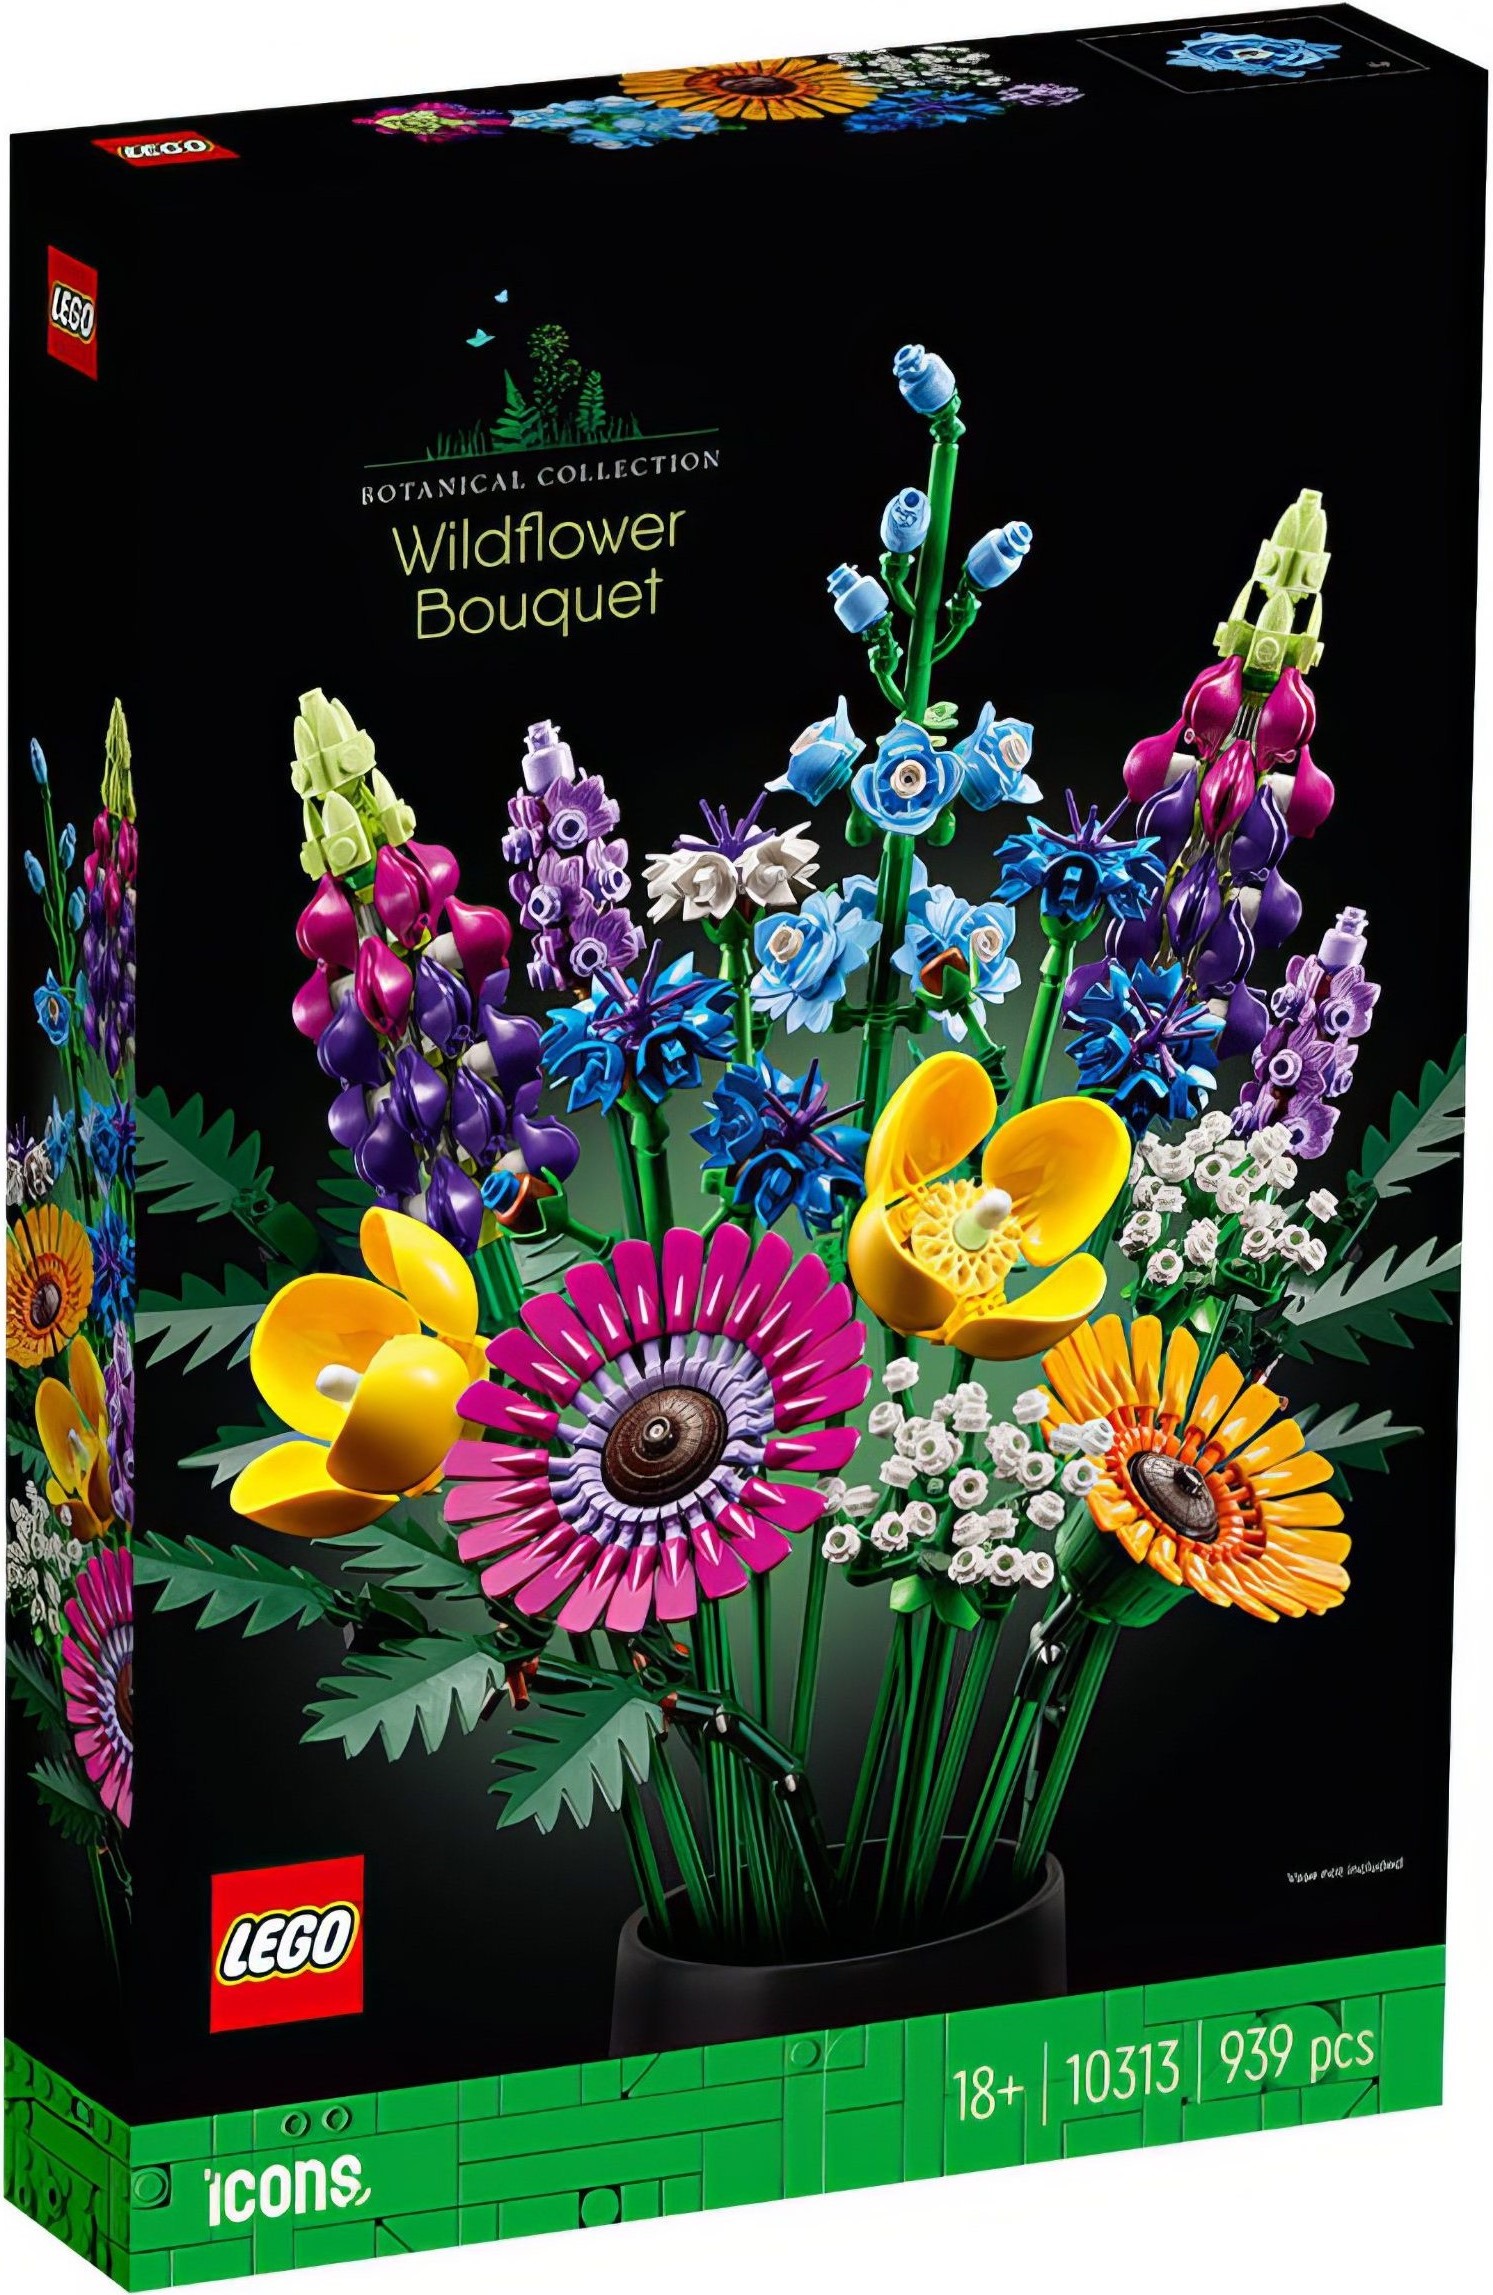 LEGO Icons Botanical Collection Officially Revealed - The Brick Fan